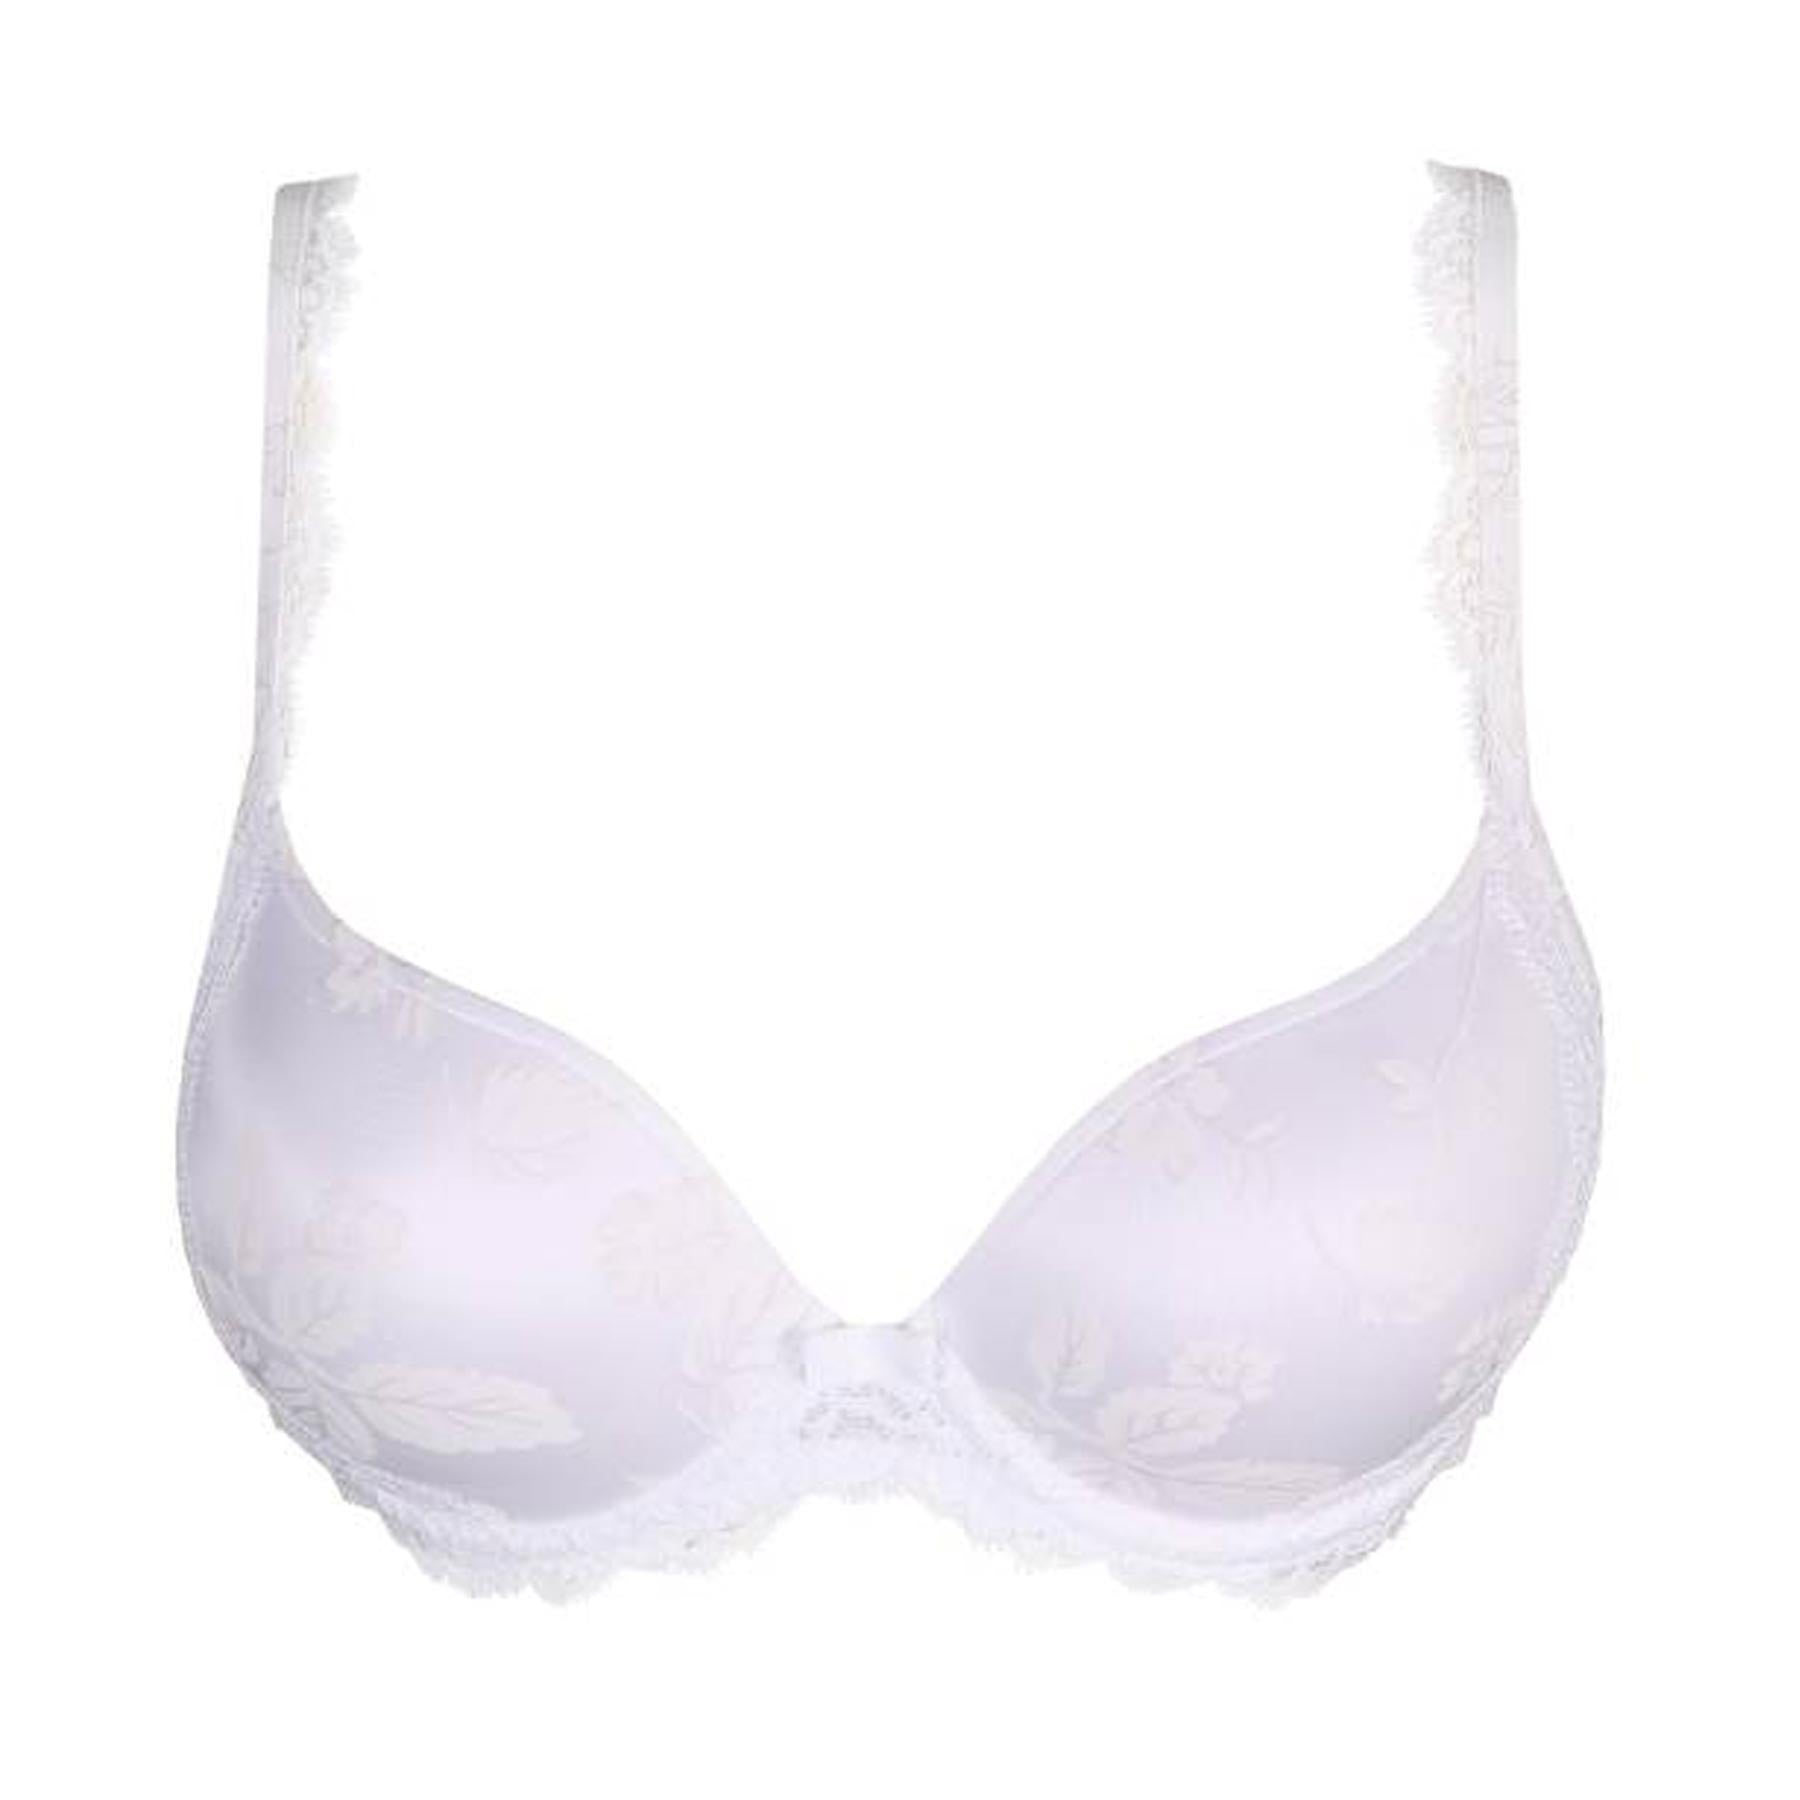 Buy Jockey White Solid Non Wired Non Padded Everyday Firm Support Bra ES13  0105 - Bra for Women 10513612